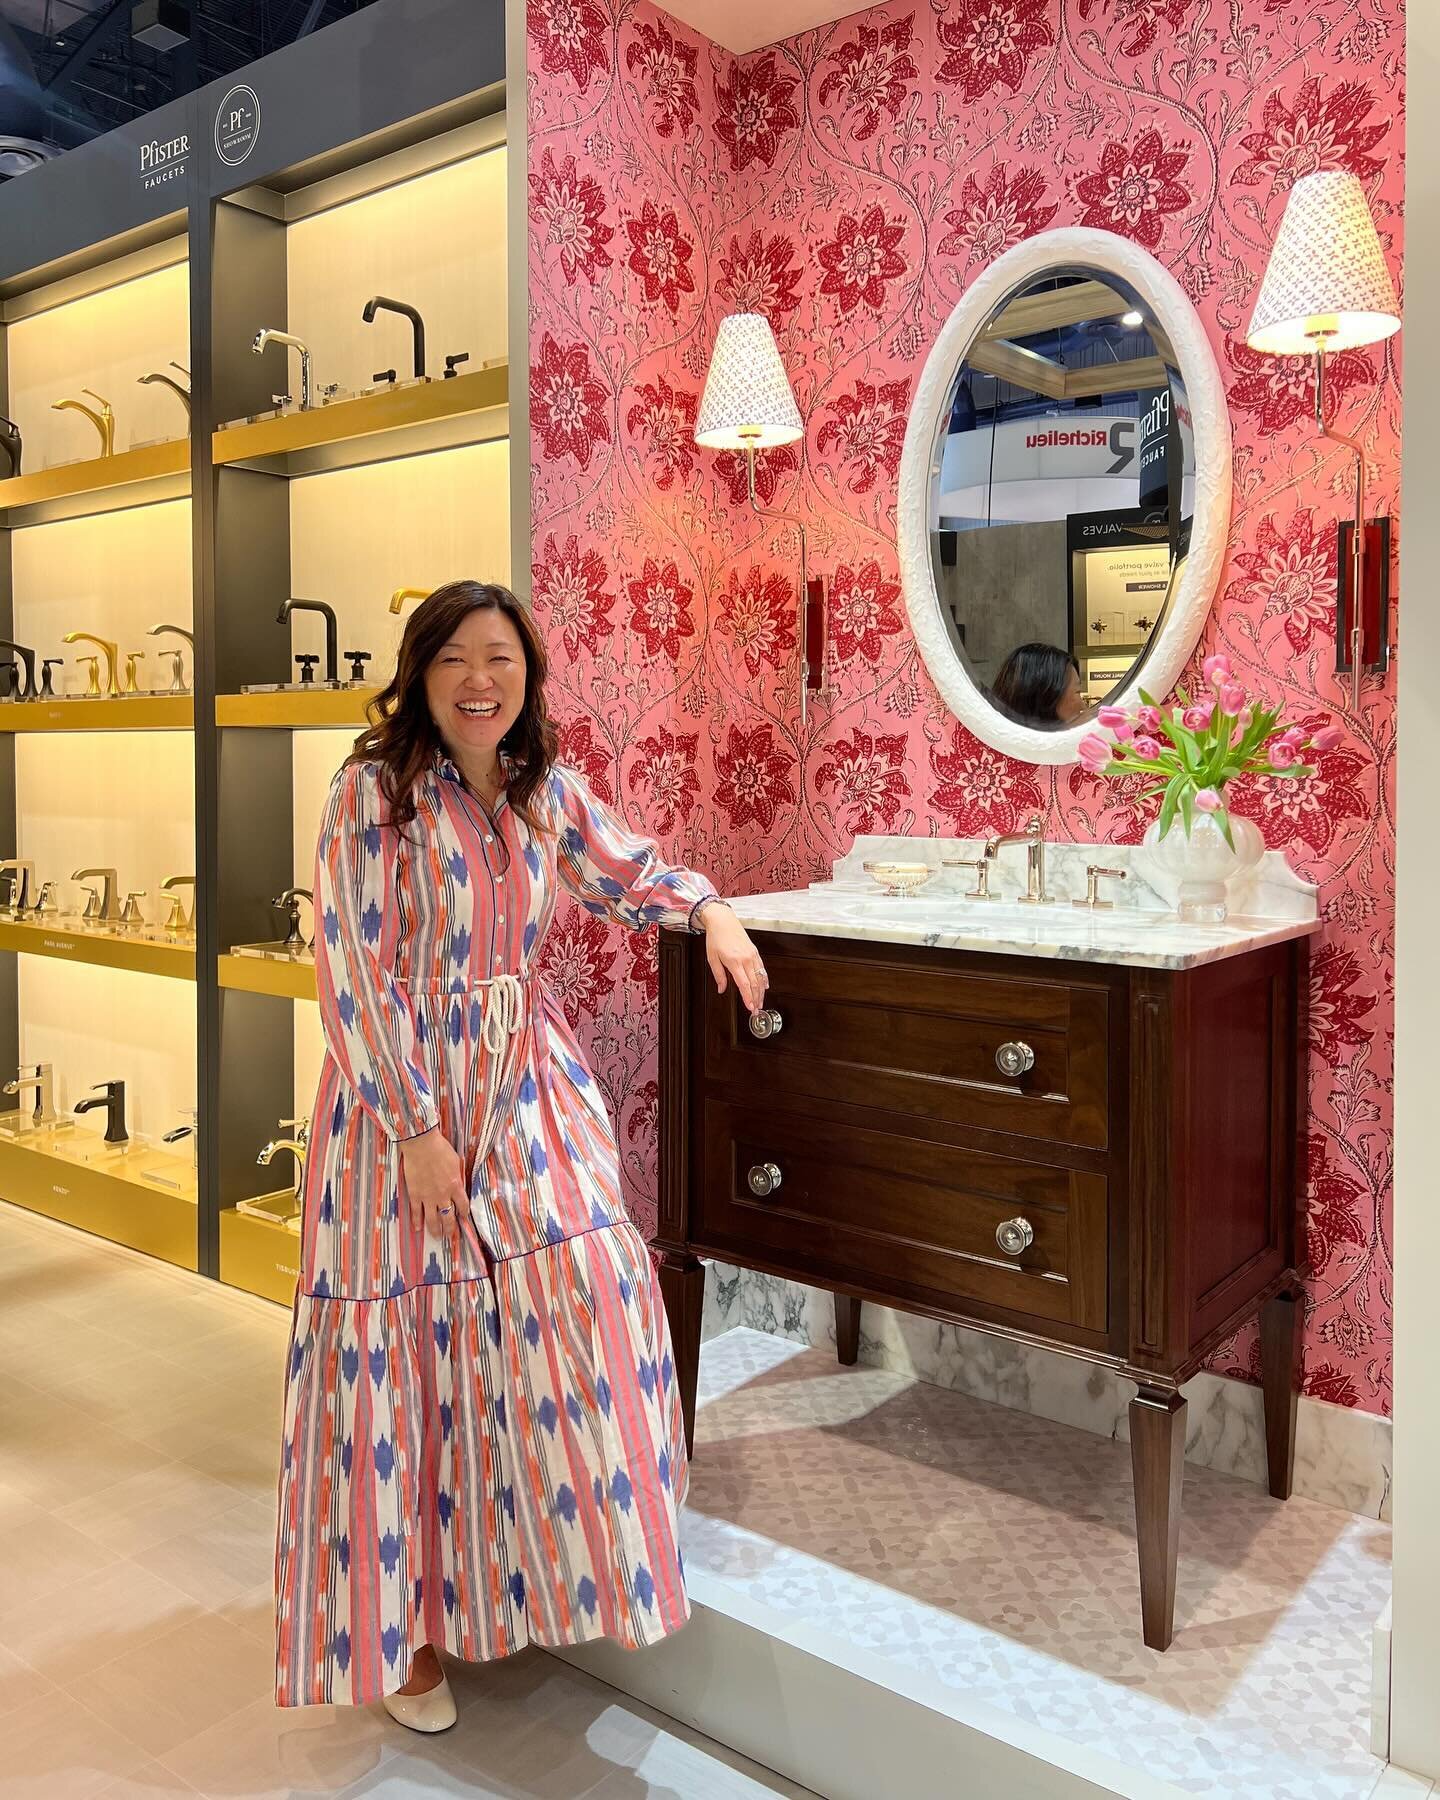 I had the most fabulous time @kbis_official this past week. Thank you so much @pfisterfaucets for having me! It was so fun to design this vignette around your beautiful #hillstone faucet and to join @evandmillard @chelseaskyeinteriors and @duvaldesig